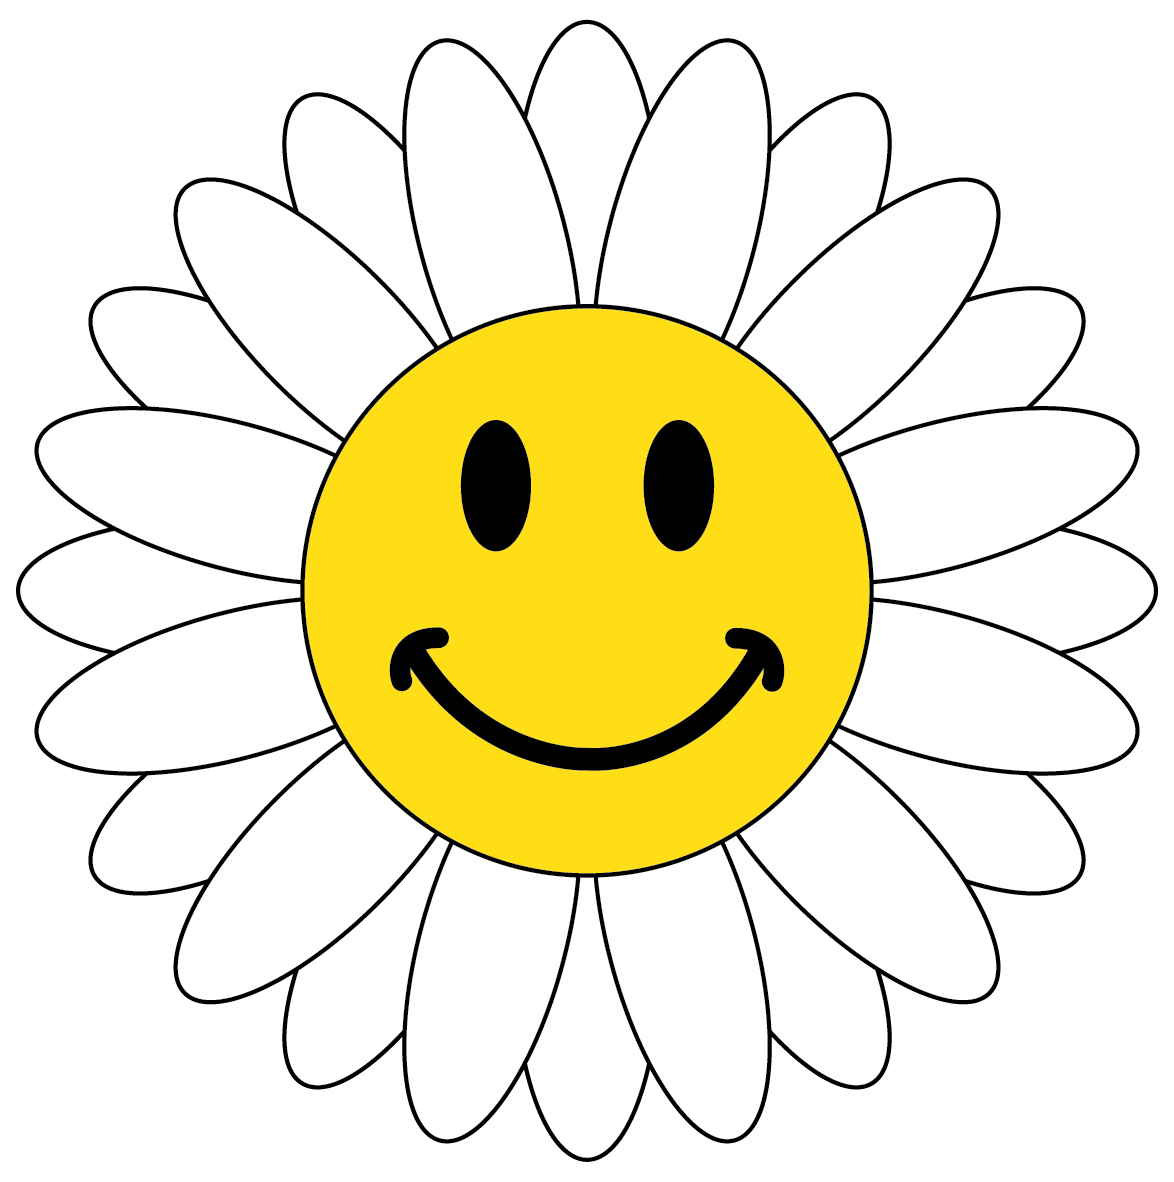 16 Smiley Face Sun Free Cliparts That You Can Download To You Computer    